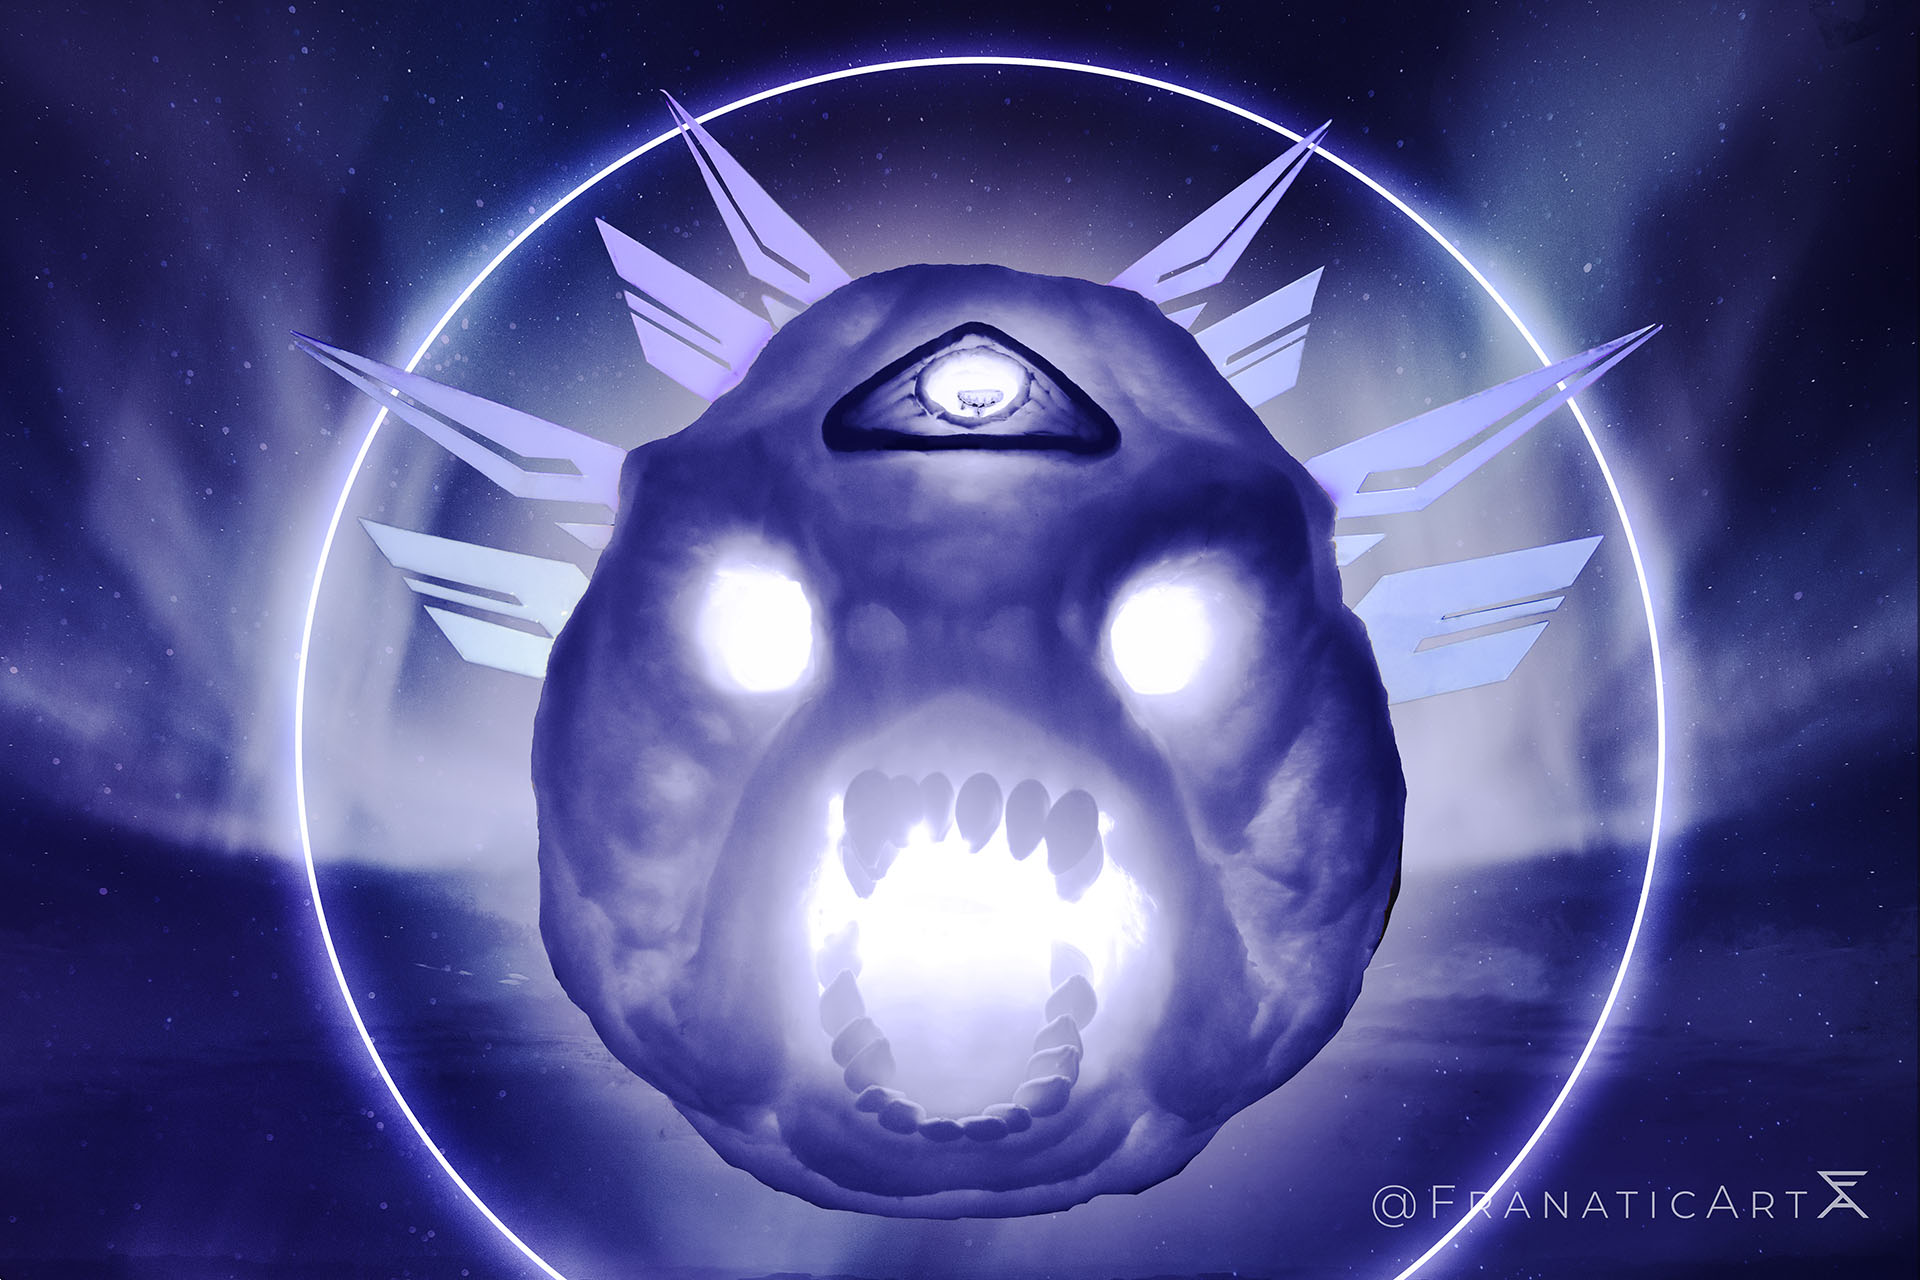 Pumpkin Carving of Emperor Calus, boss of the Destiny 2 raid, The Leviathan. This heavily edited photo shows the pumpkin in the psionic realm, where Calus's head looms over the players in a purple void.